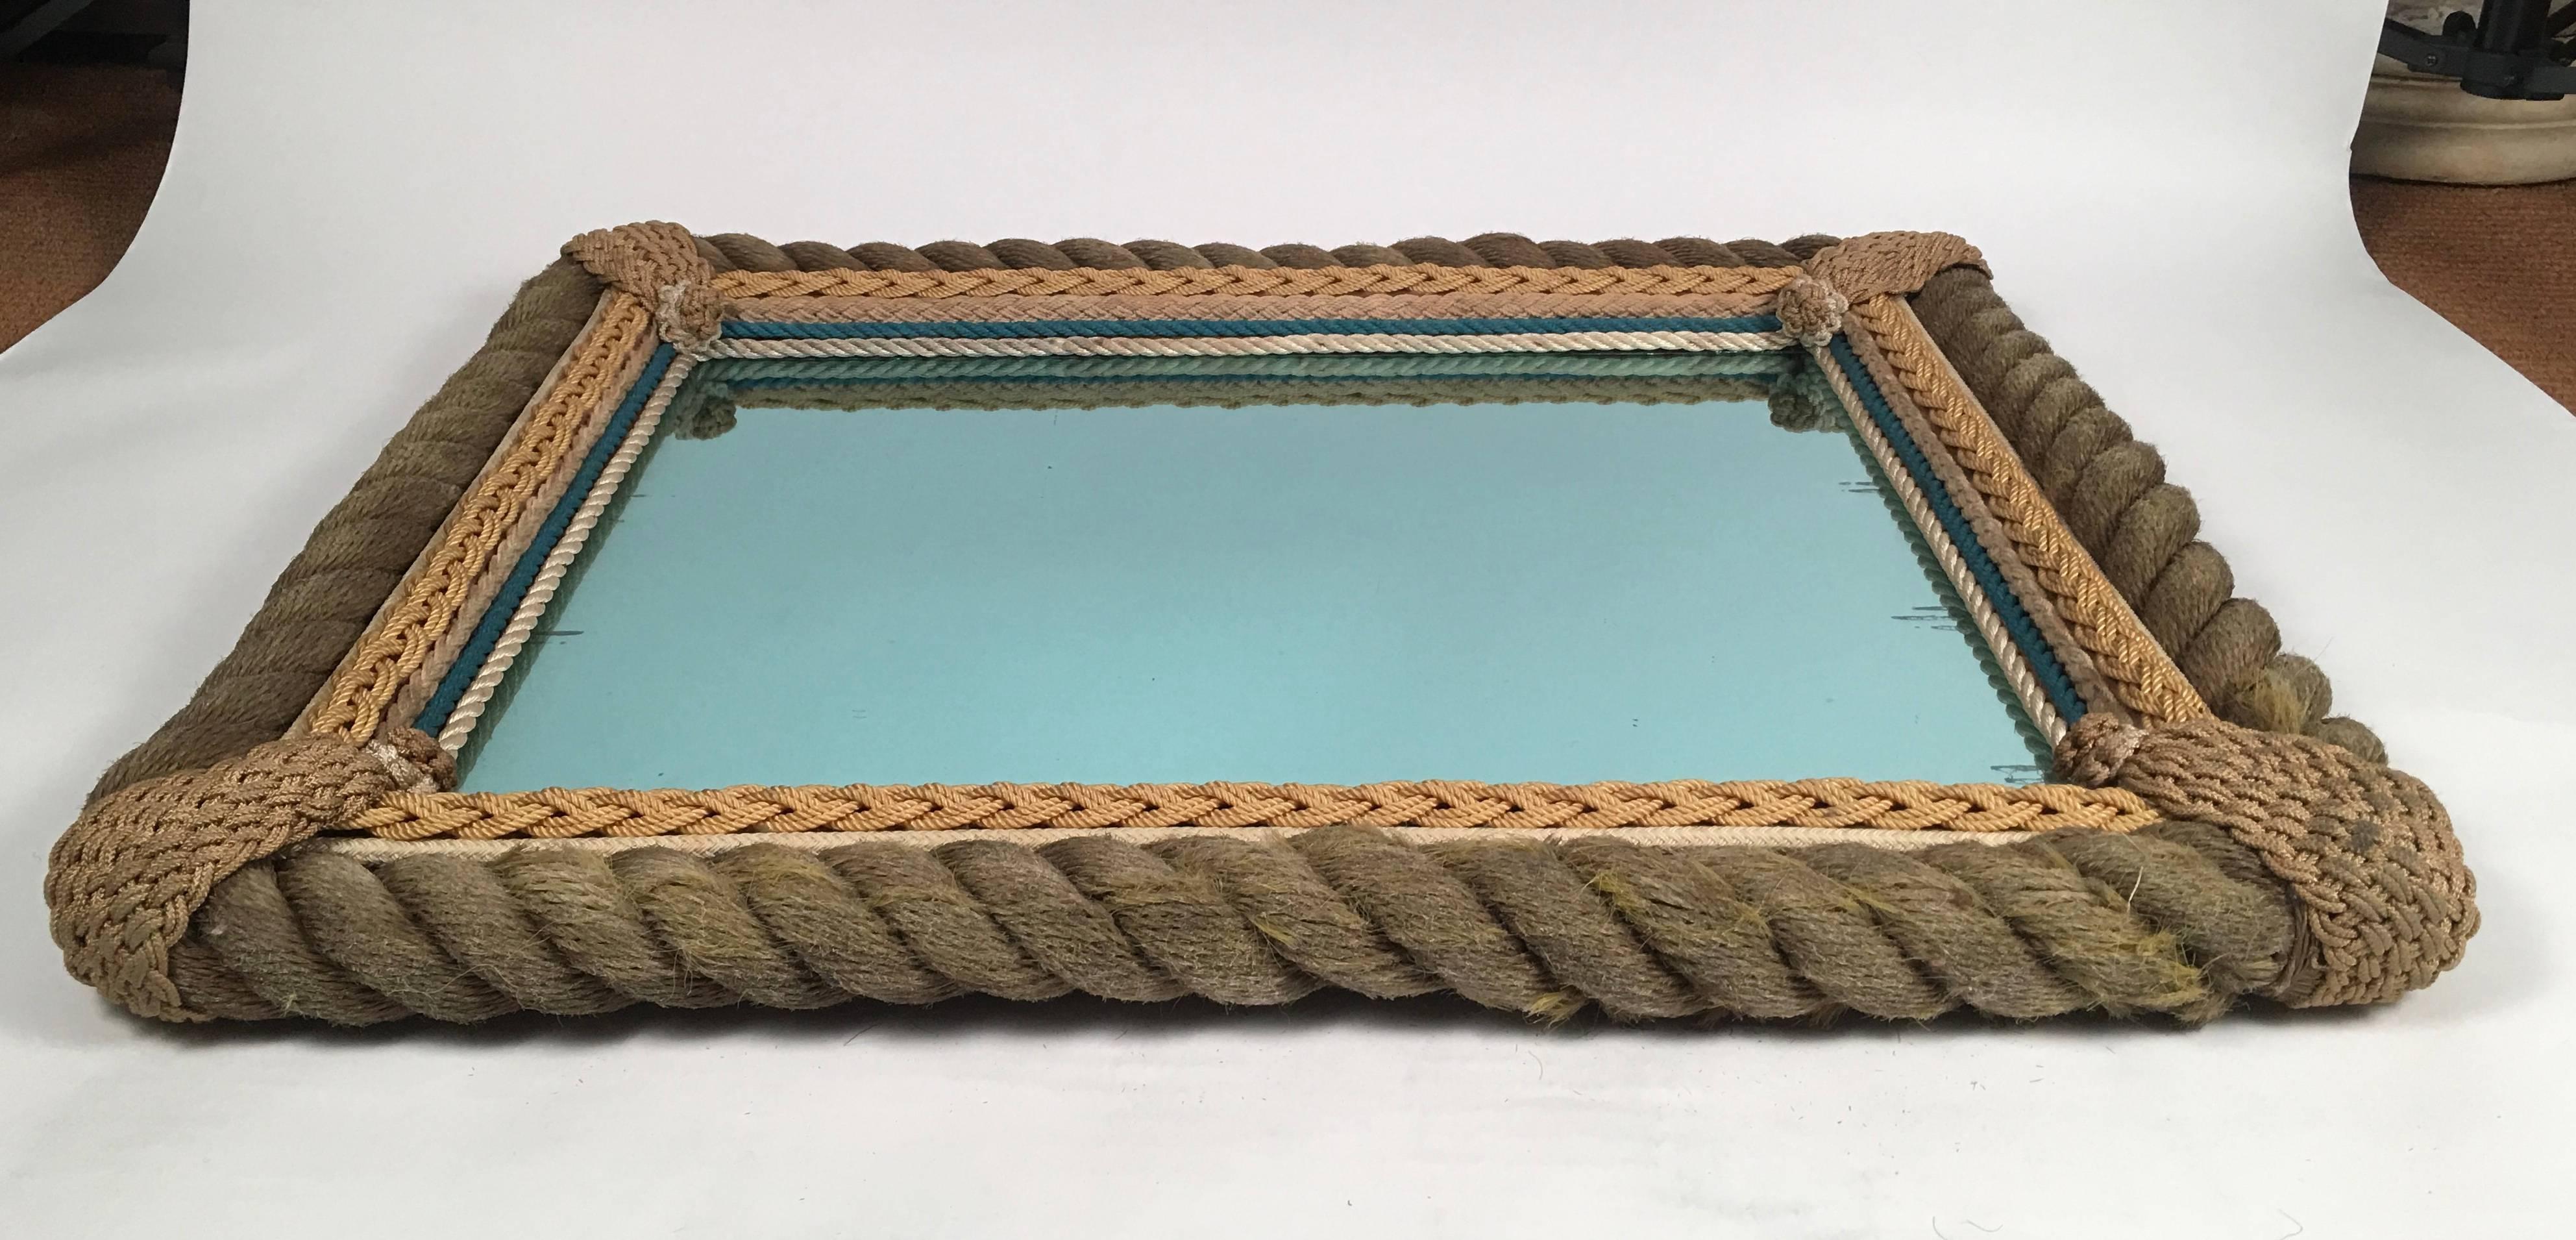 A beautifully crafted sailor made, nautical ropework frame, the thick coiled rope decorated with intricate knot work at each corner over a border of intricate knotted and braided rope which is lined with parallel lines of both blue and white rope.